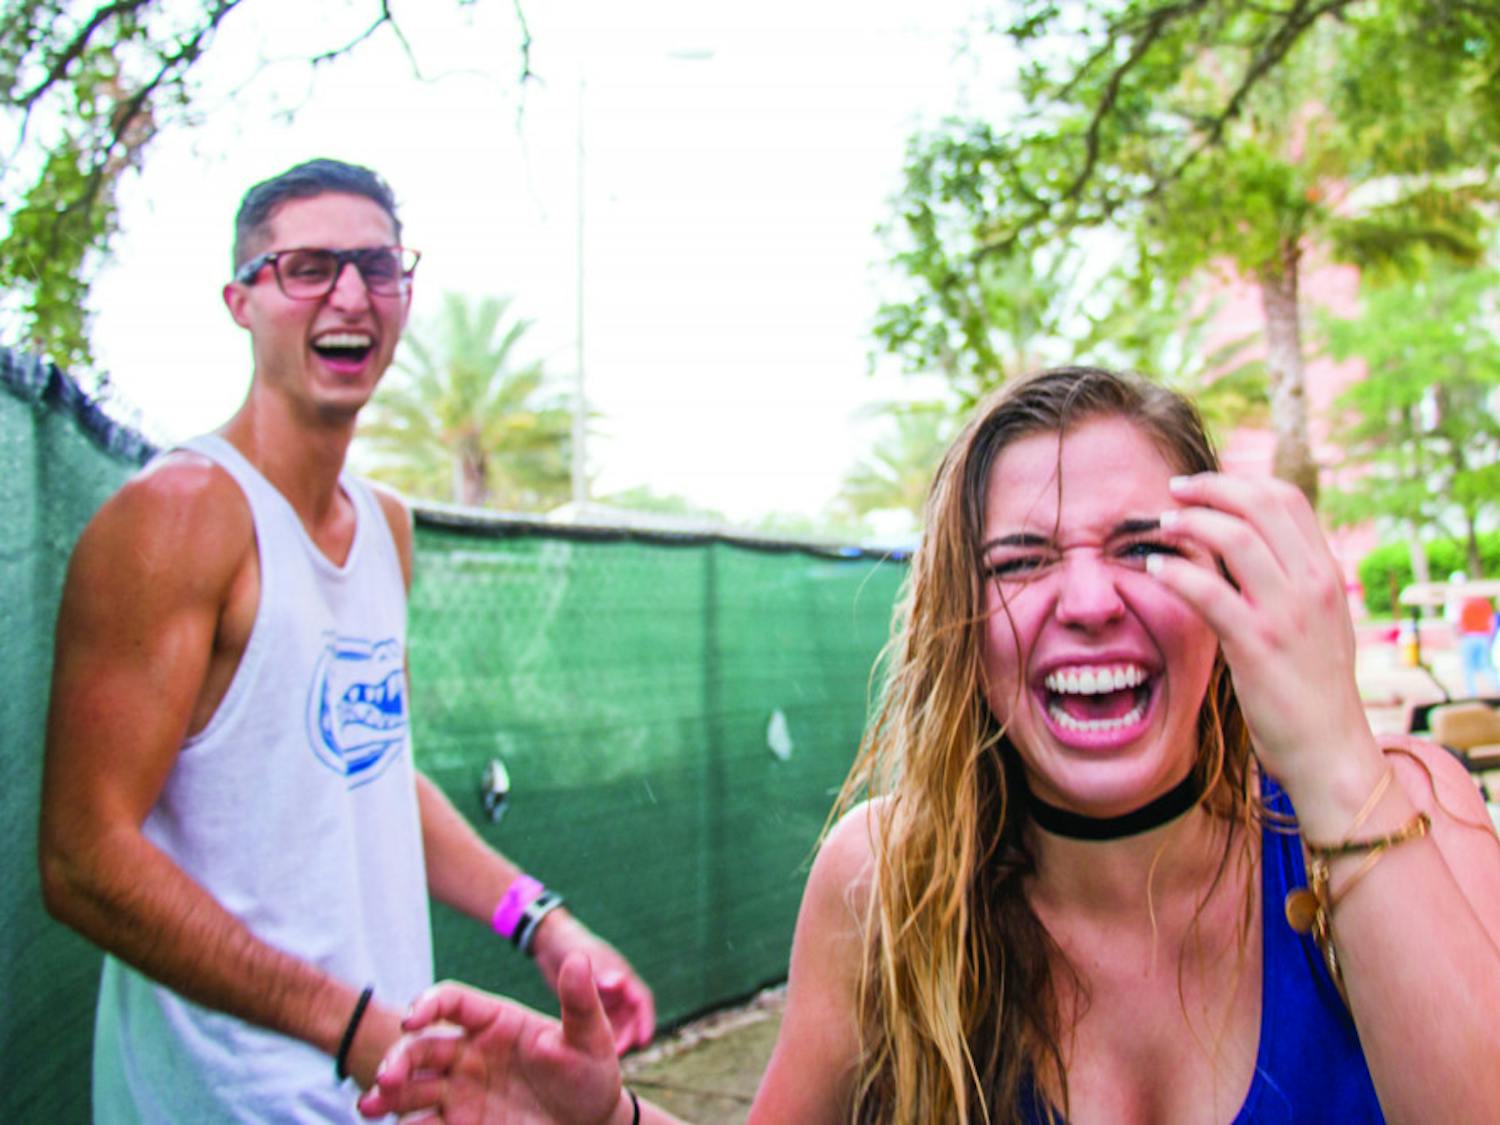 From left: UF students Richard Minichiello and Sarah Galante laugh while facing the rain before the UF Homecoming football game on Saturday afternoon. They “couldn’t believe they got soaked,” said Galante.